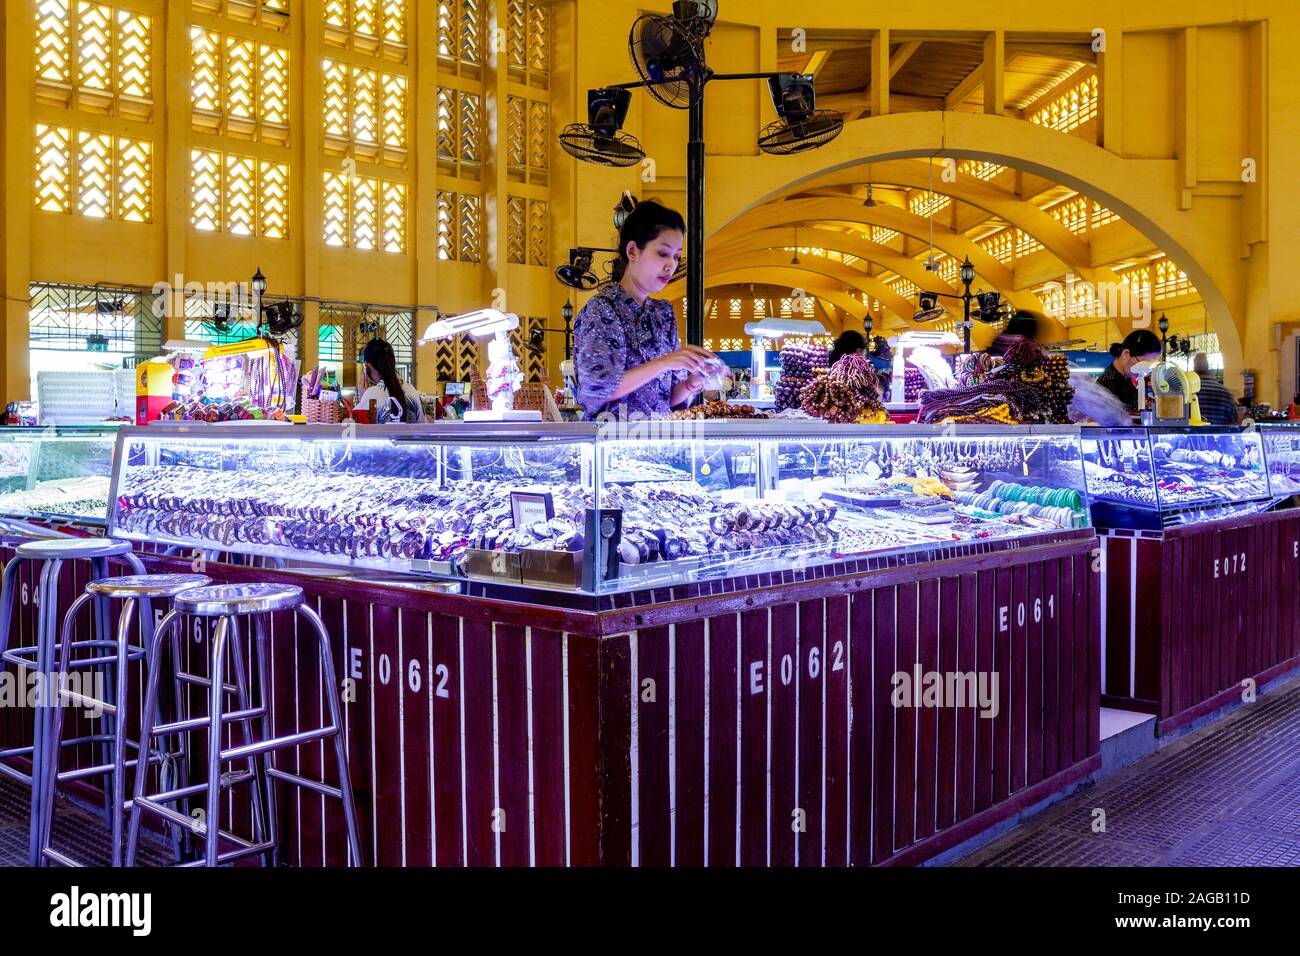 A Young Woman Selling Watches and Jewellery At The Central Market, Phnom Penh, Cambodia. Stock Photo